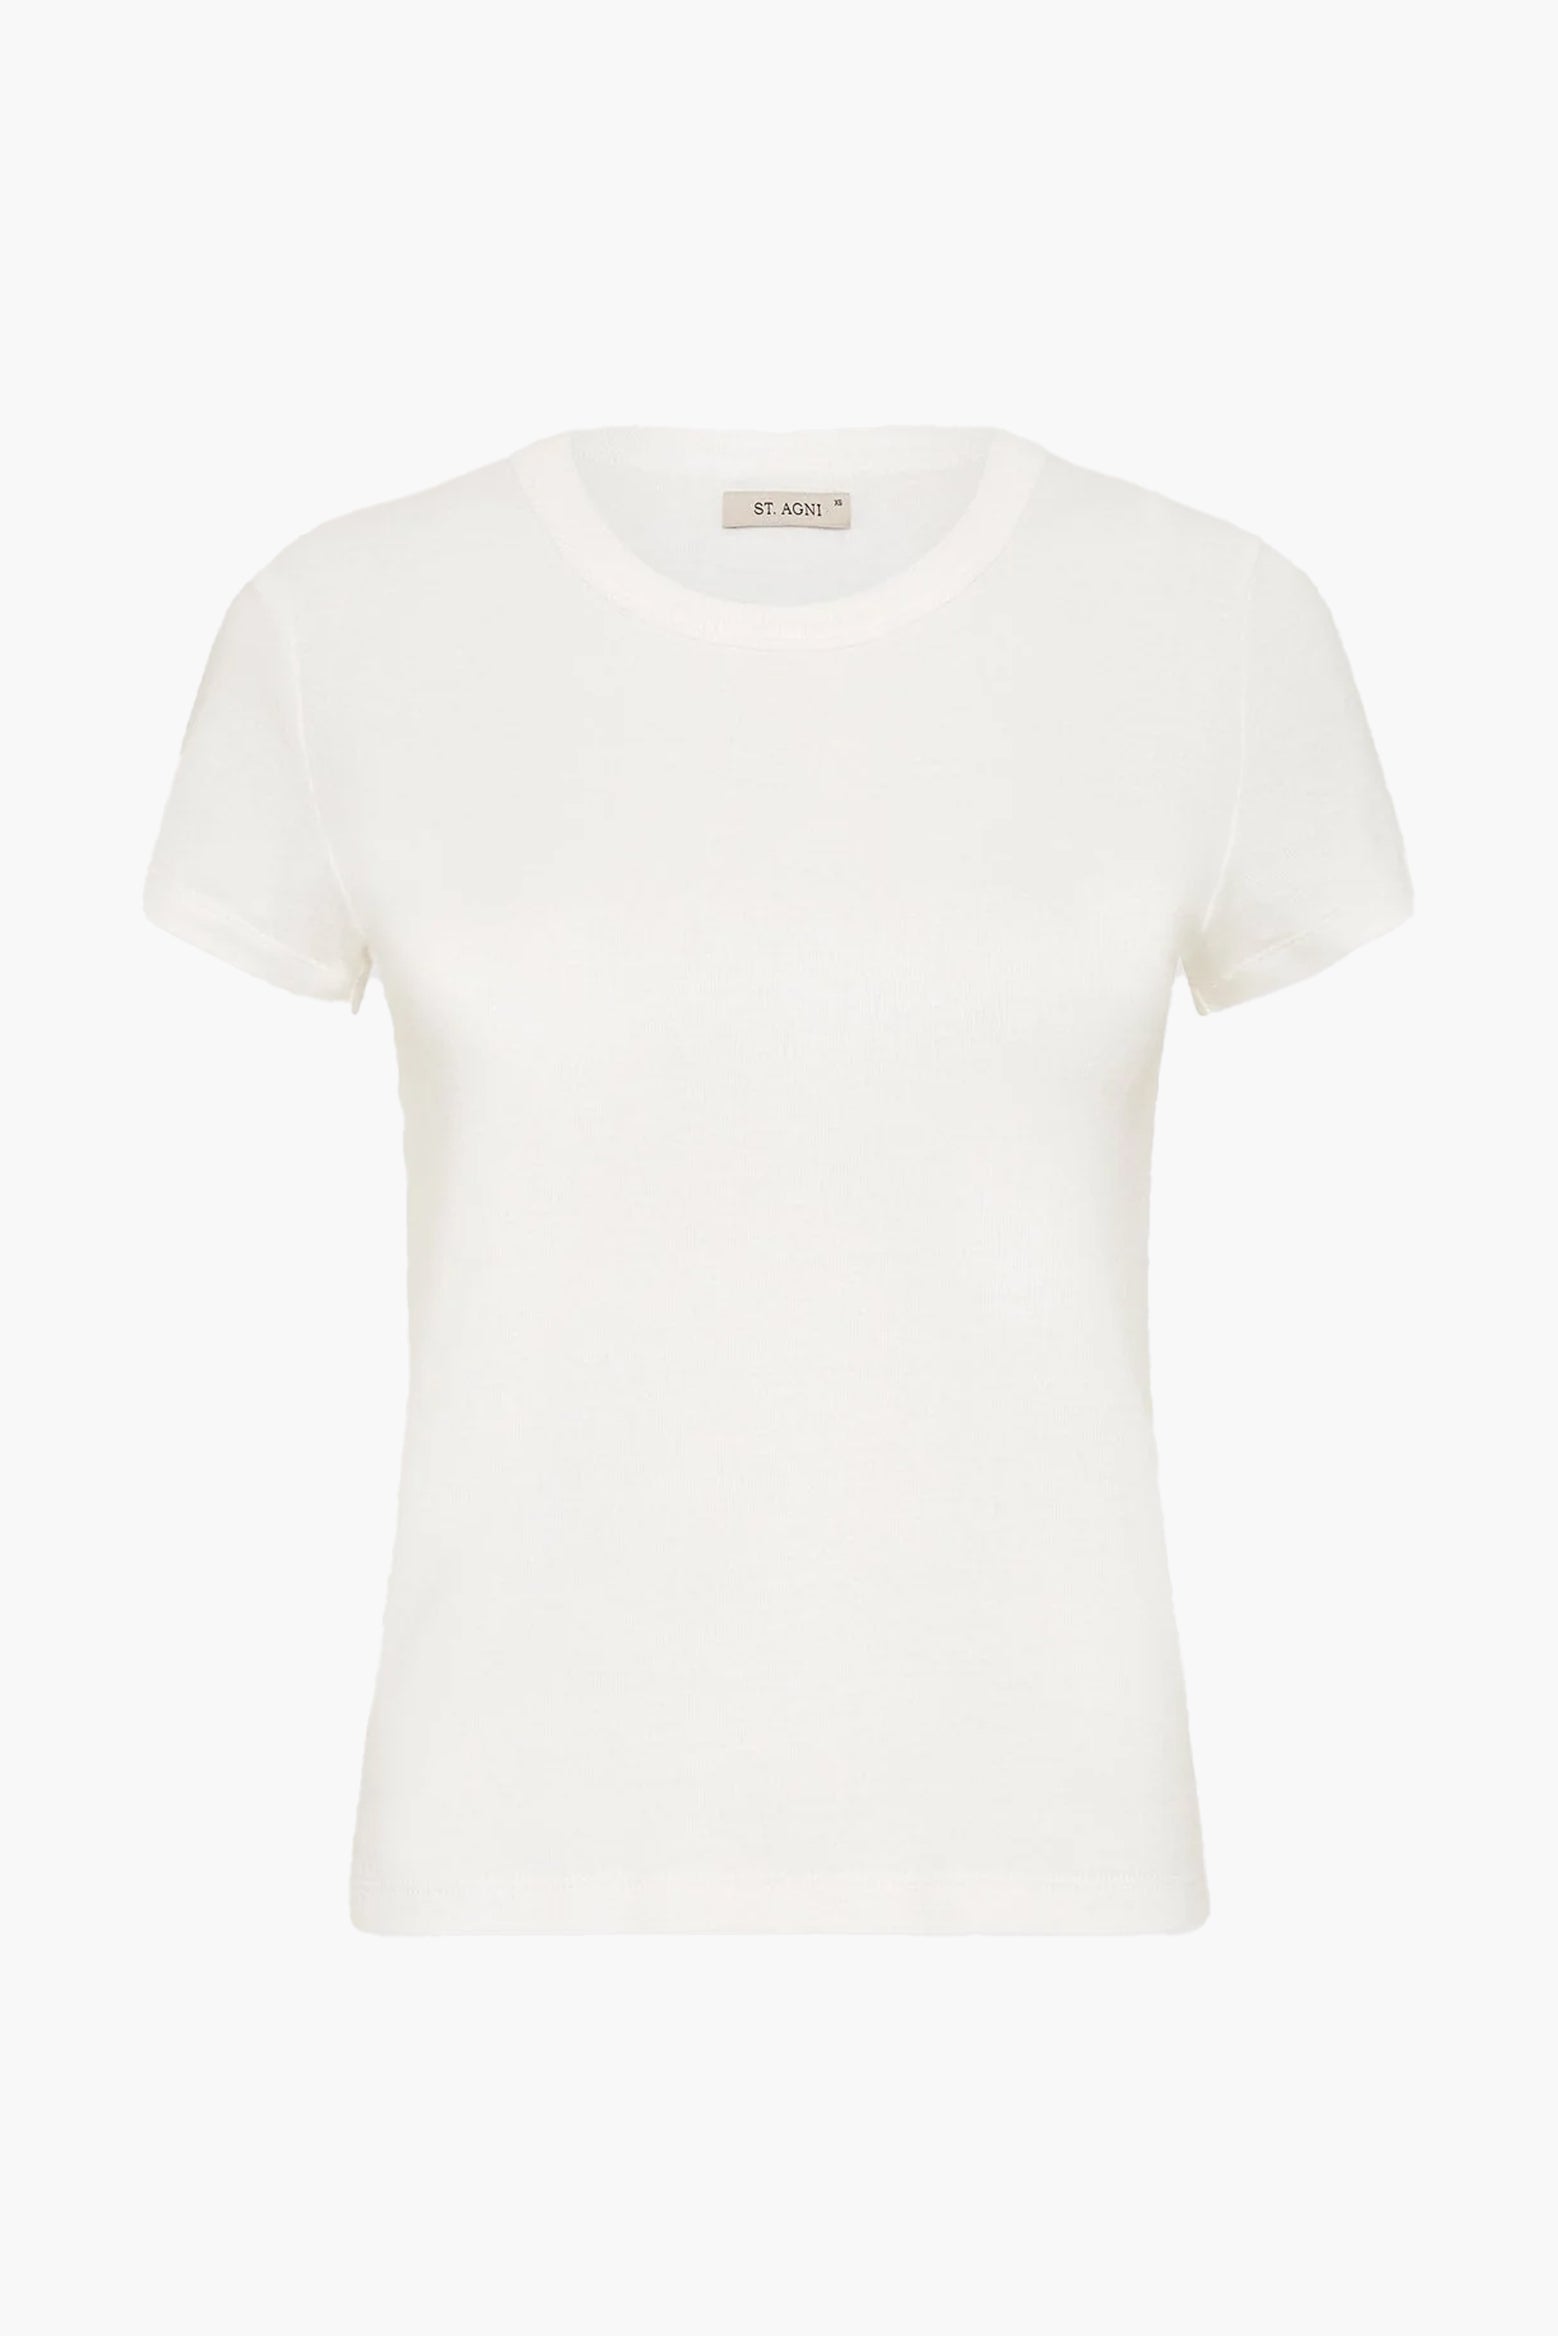 St Agni Organic Cotton T-shirt in White available at The New Trend Australia.